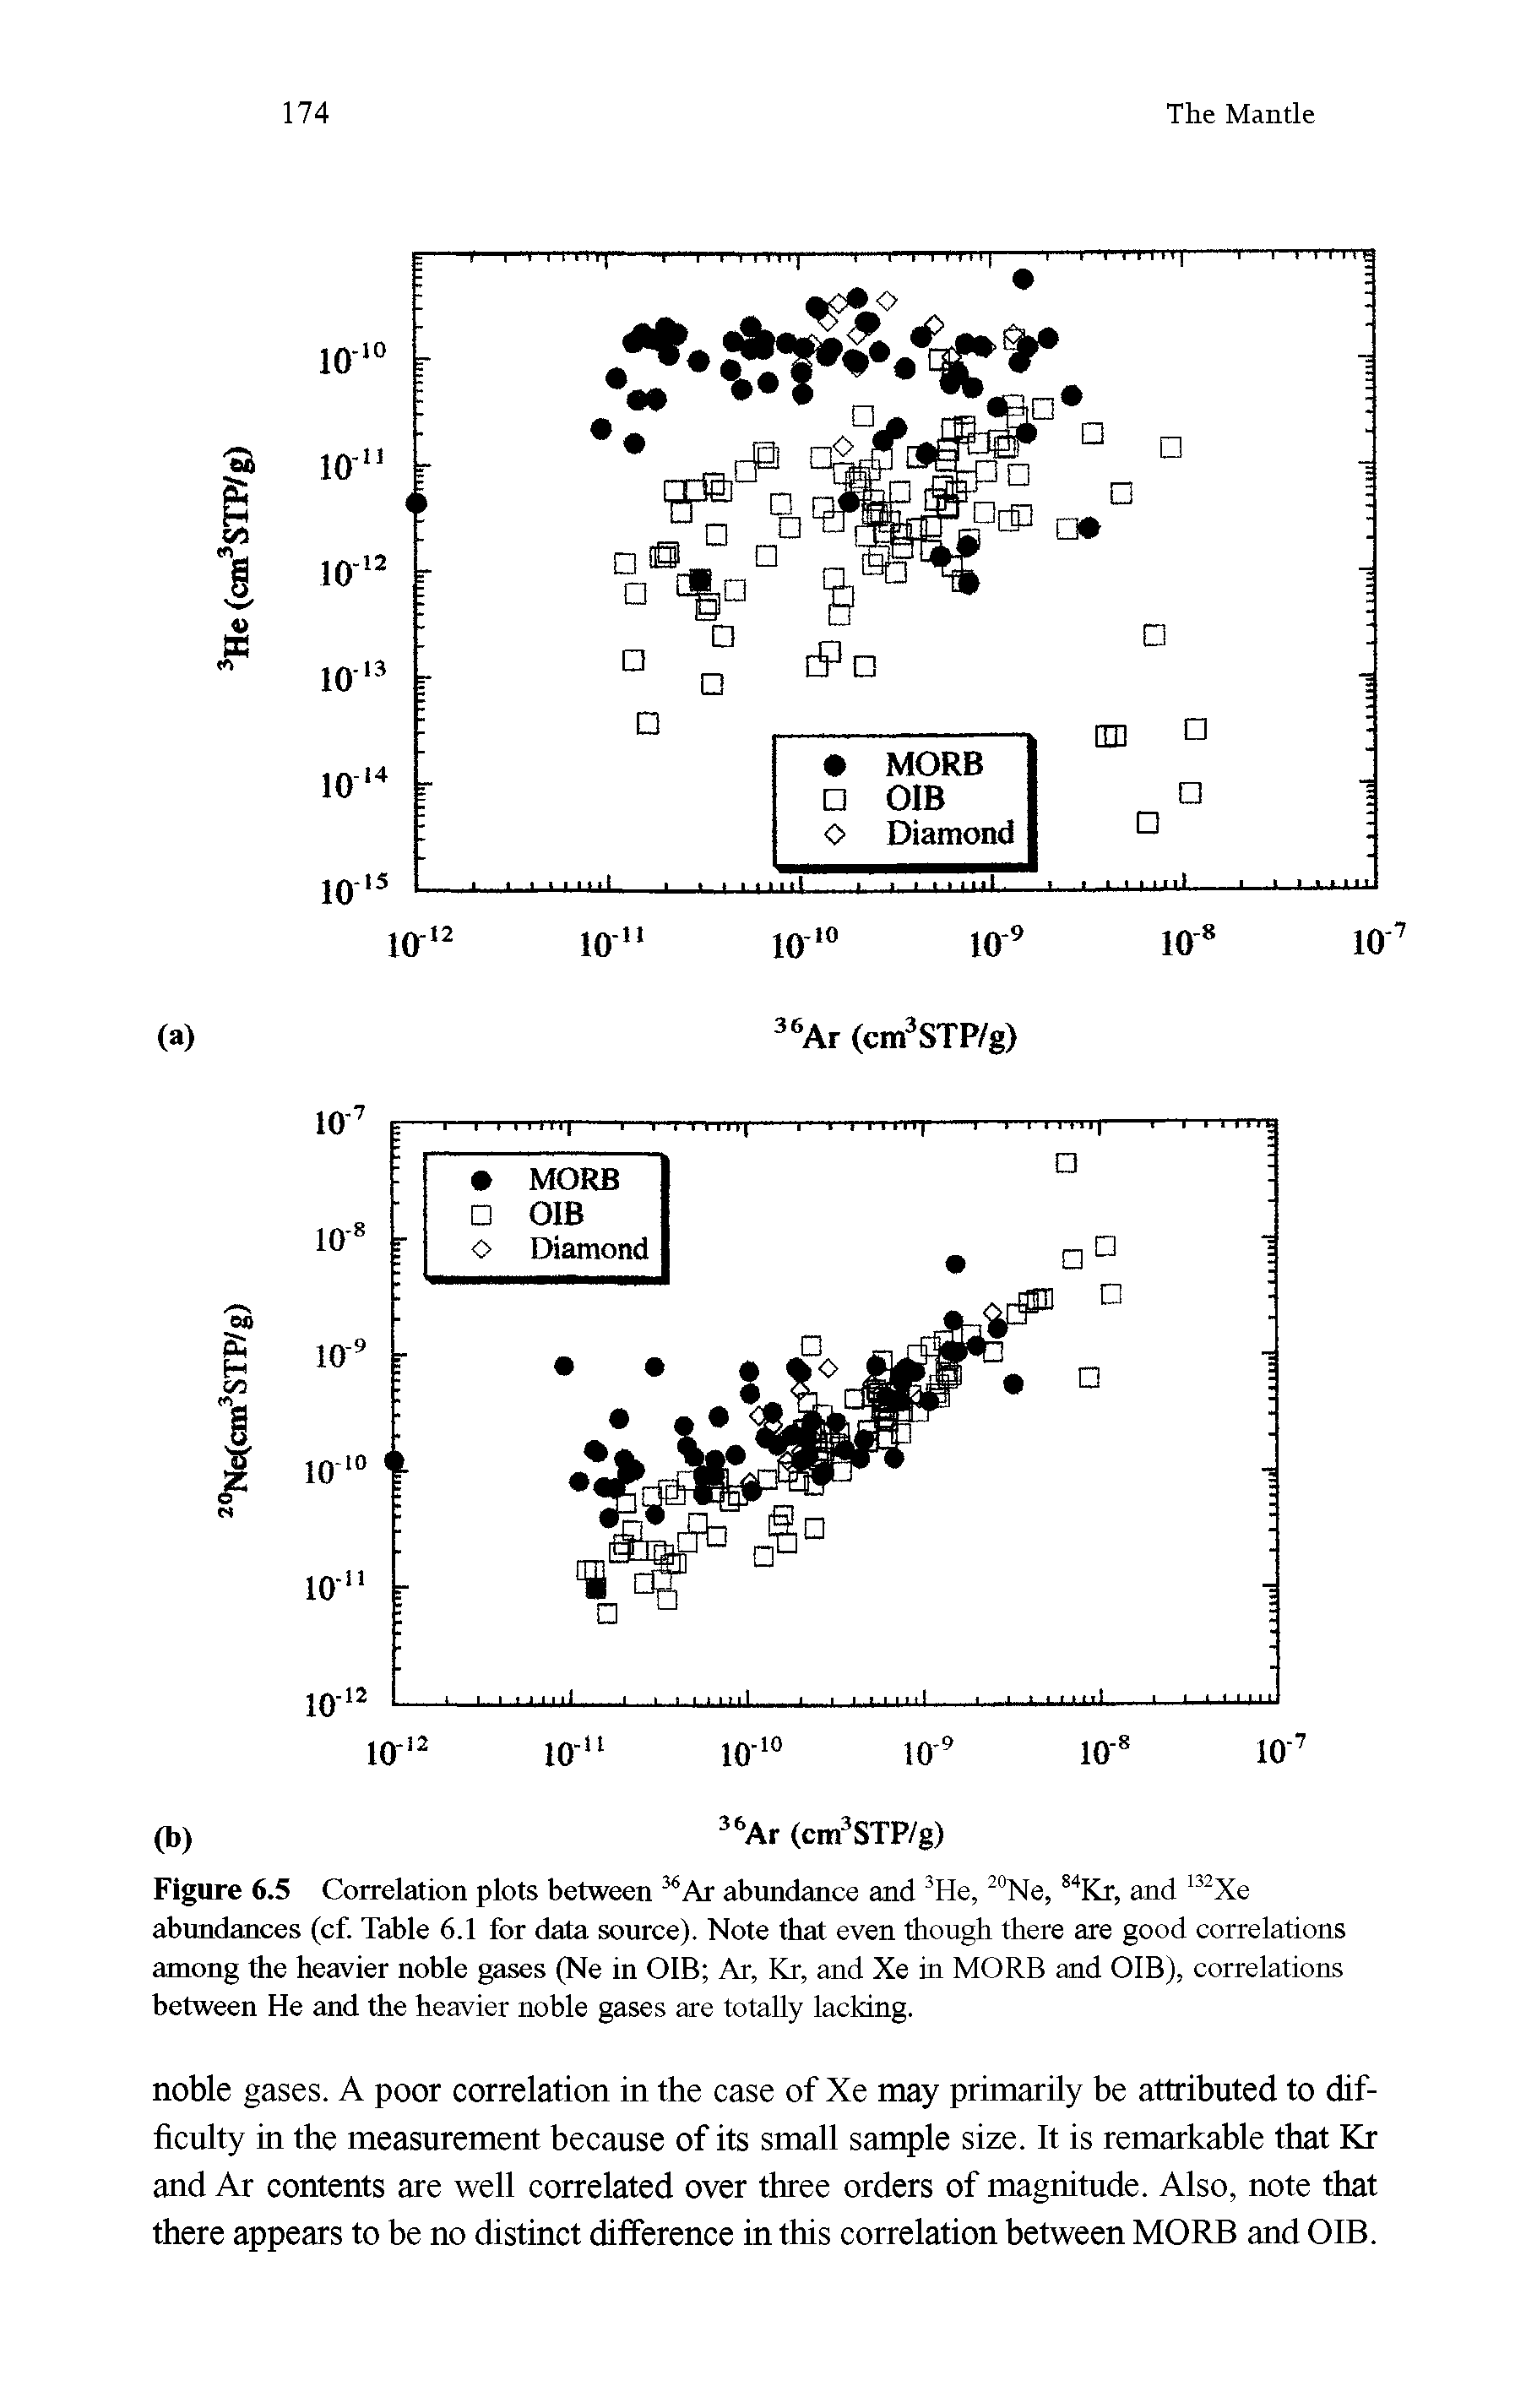 Figure 6.5 Correlation plots between 36 Ar abundance and 3He, 20Ne, 84Kr, and 132Xe abundances (cf. Table 6.1 for data source). Note that even though there are good correlations among the heavier noble gases (Ne in OIB Ar, Kr, and Xe in MORB and OIB), correlations between He and the heavier noble gases are totally lacking.